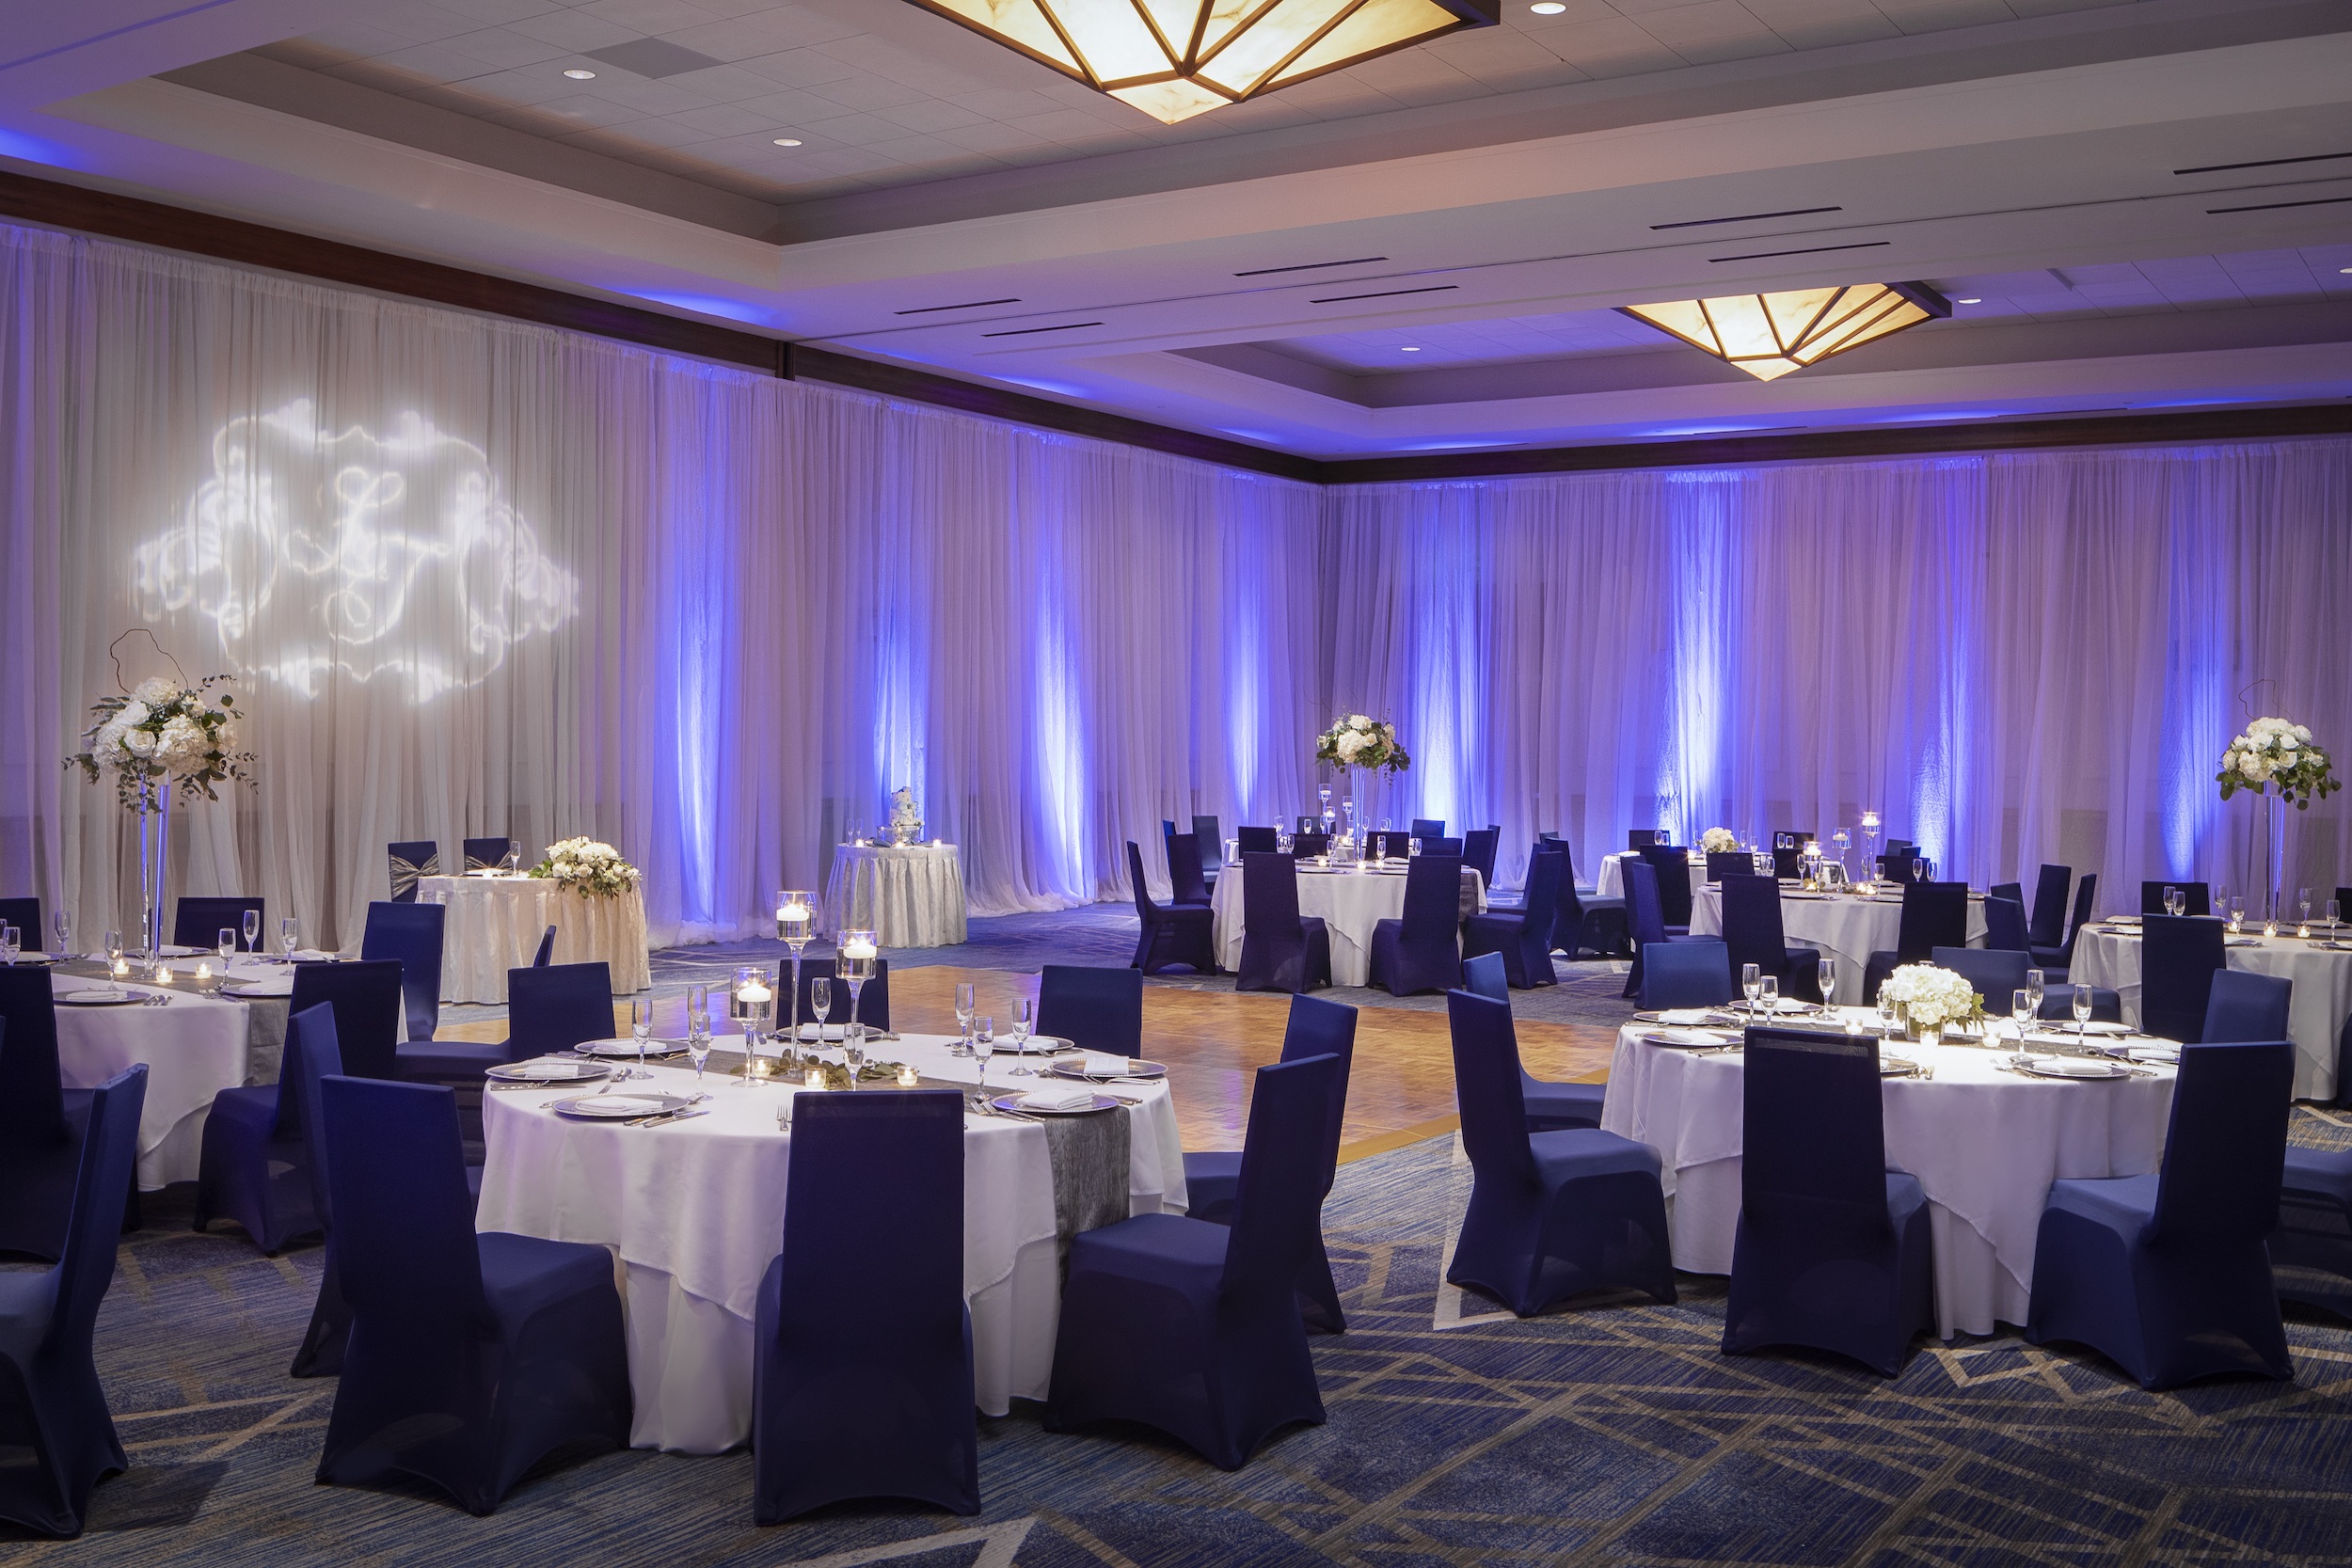 A wedding venue space at The Woodlands Waterway Marriott decorated with navy blue chairs, blue lighting, and white linens.